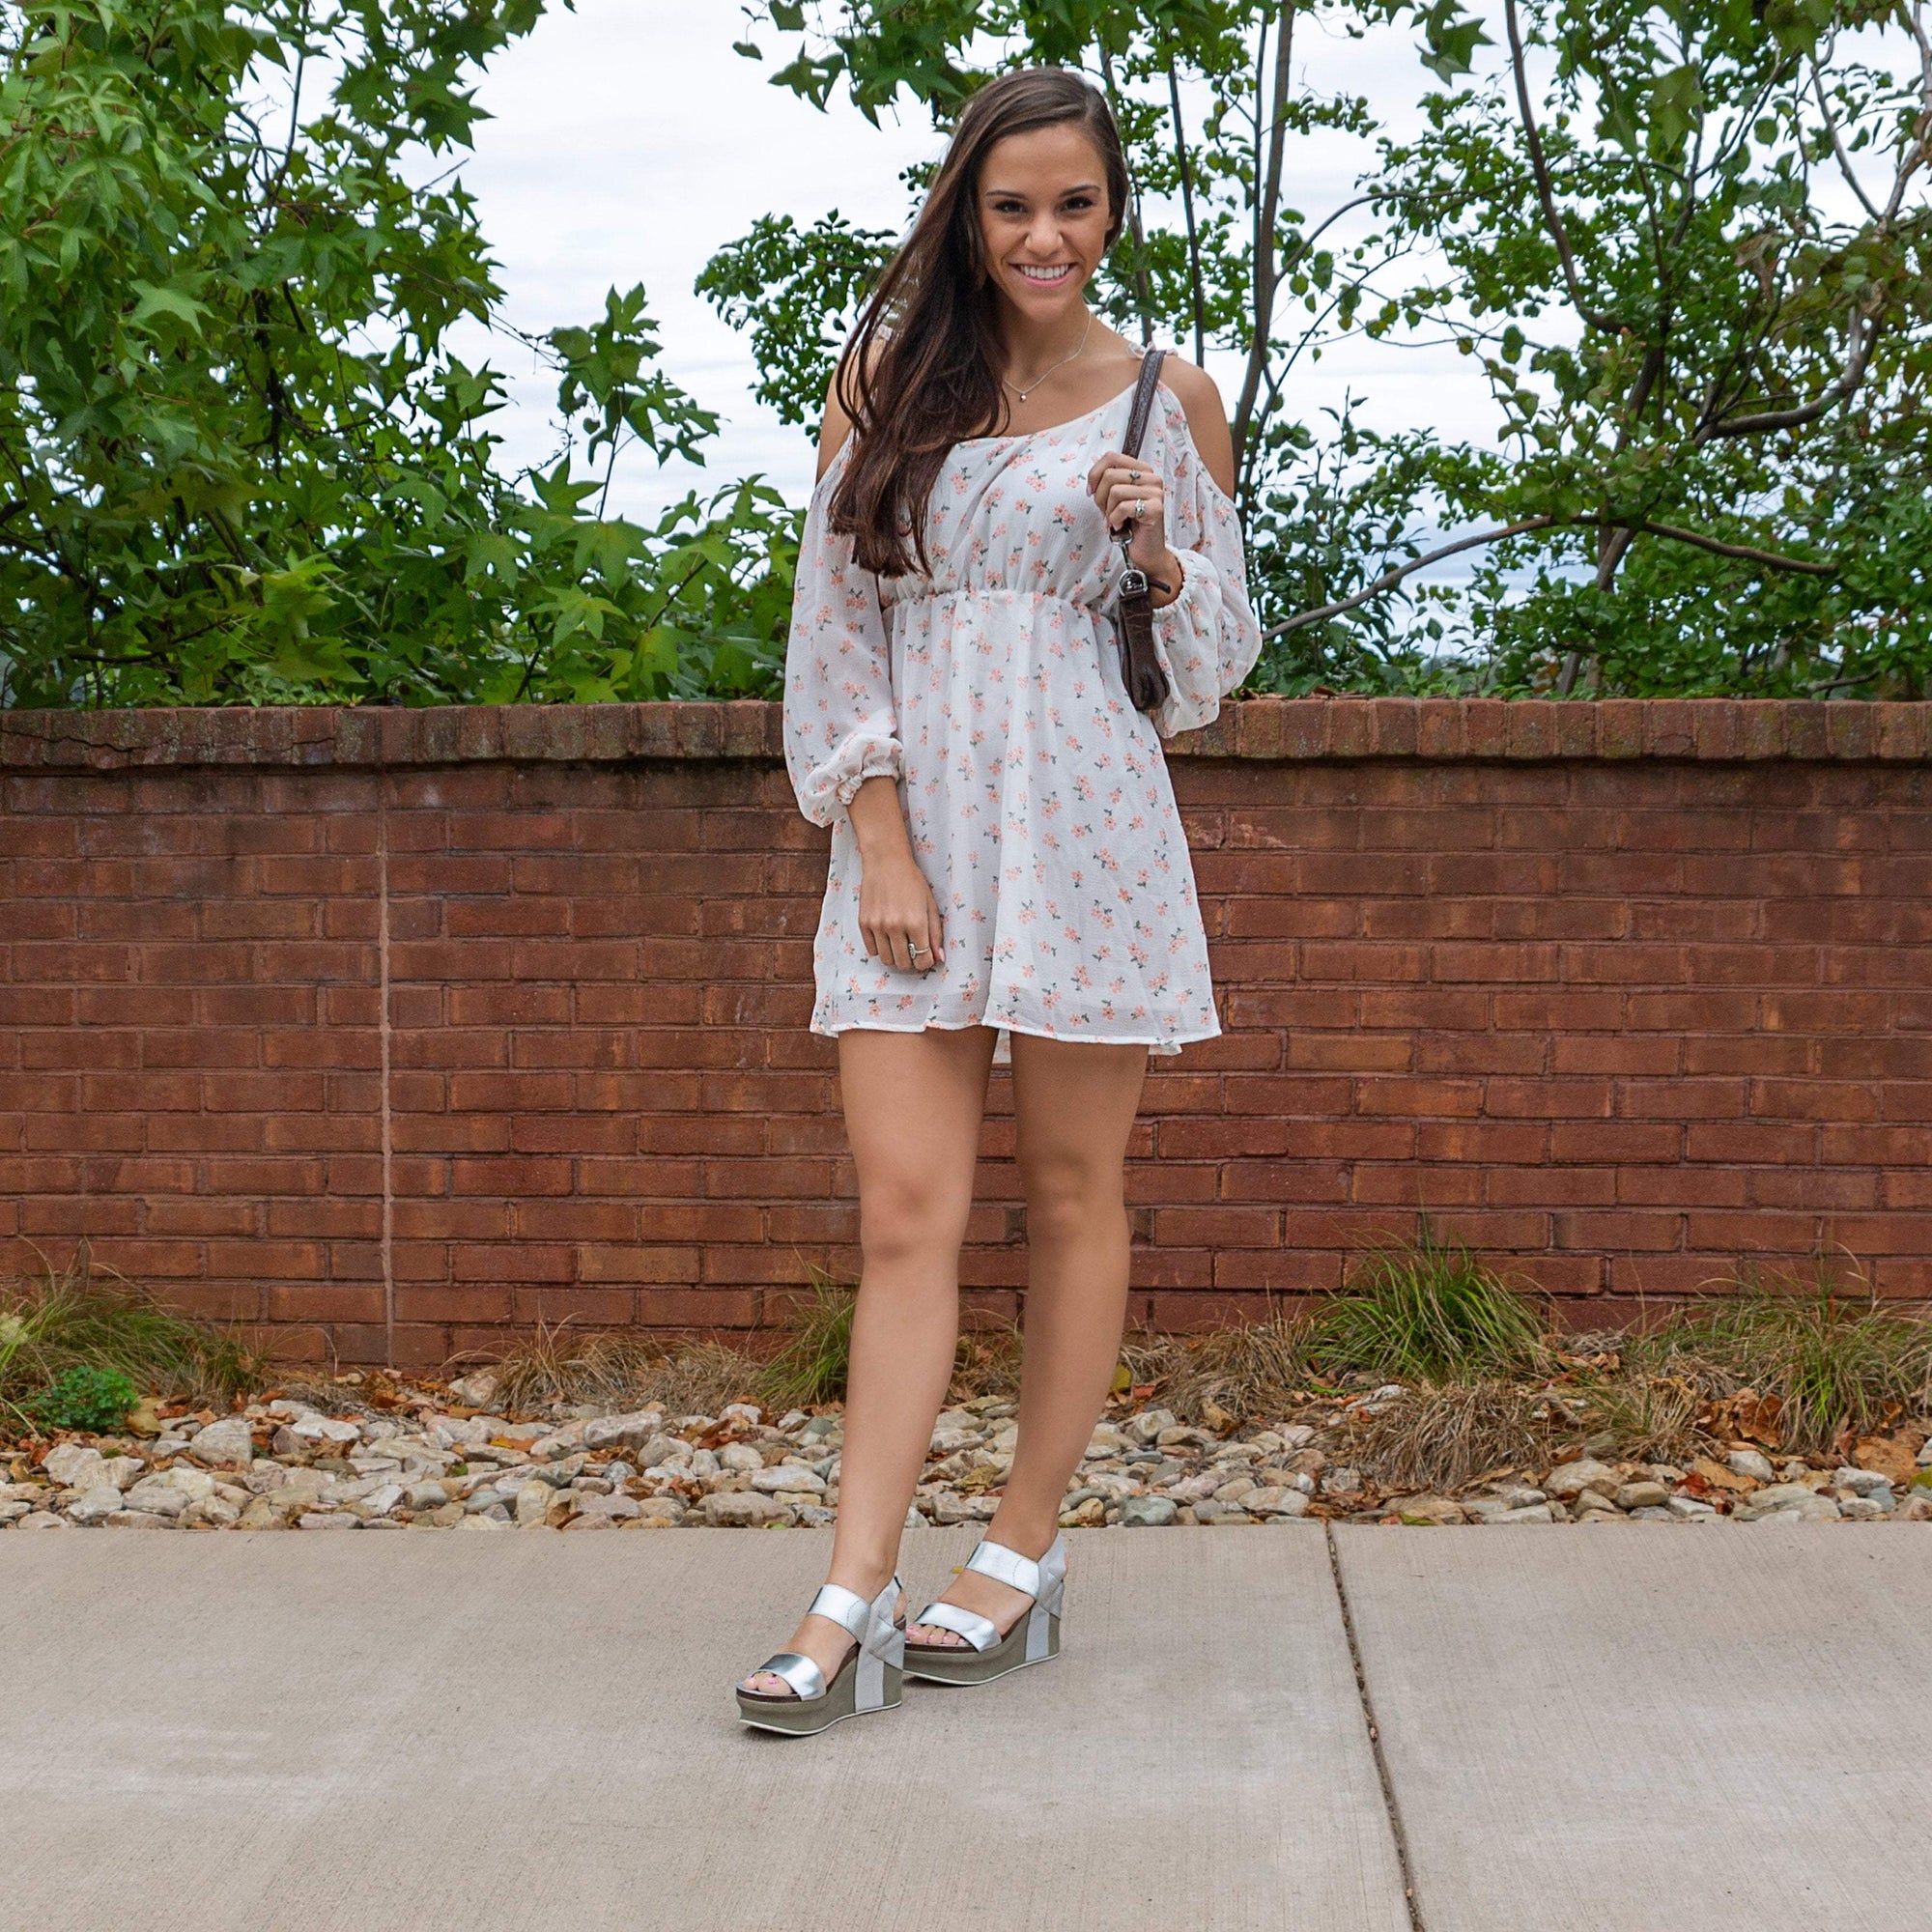 Bushnell in Silver Wedge Sandals 